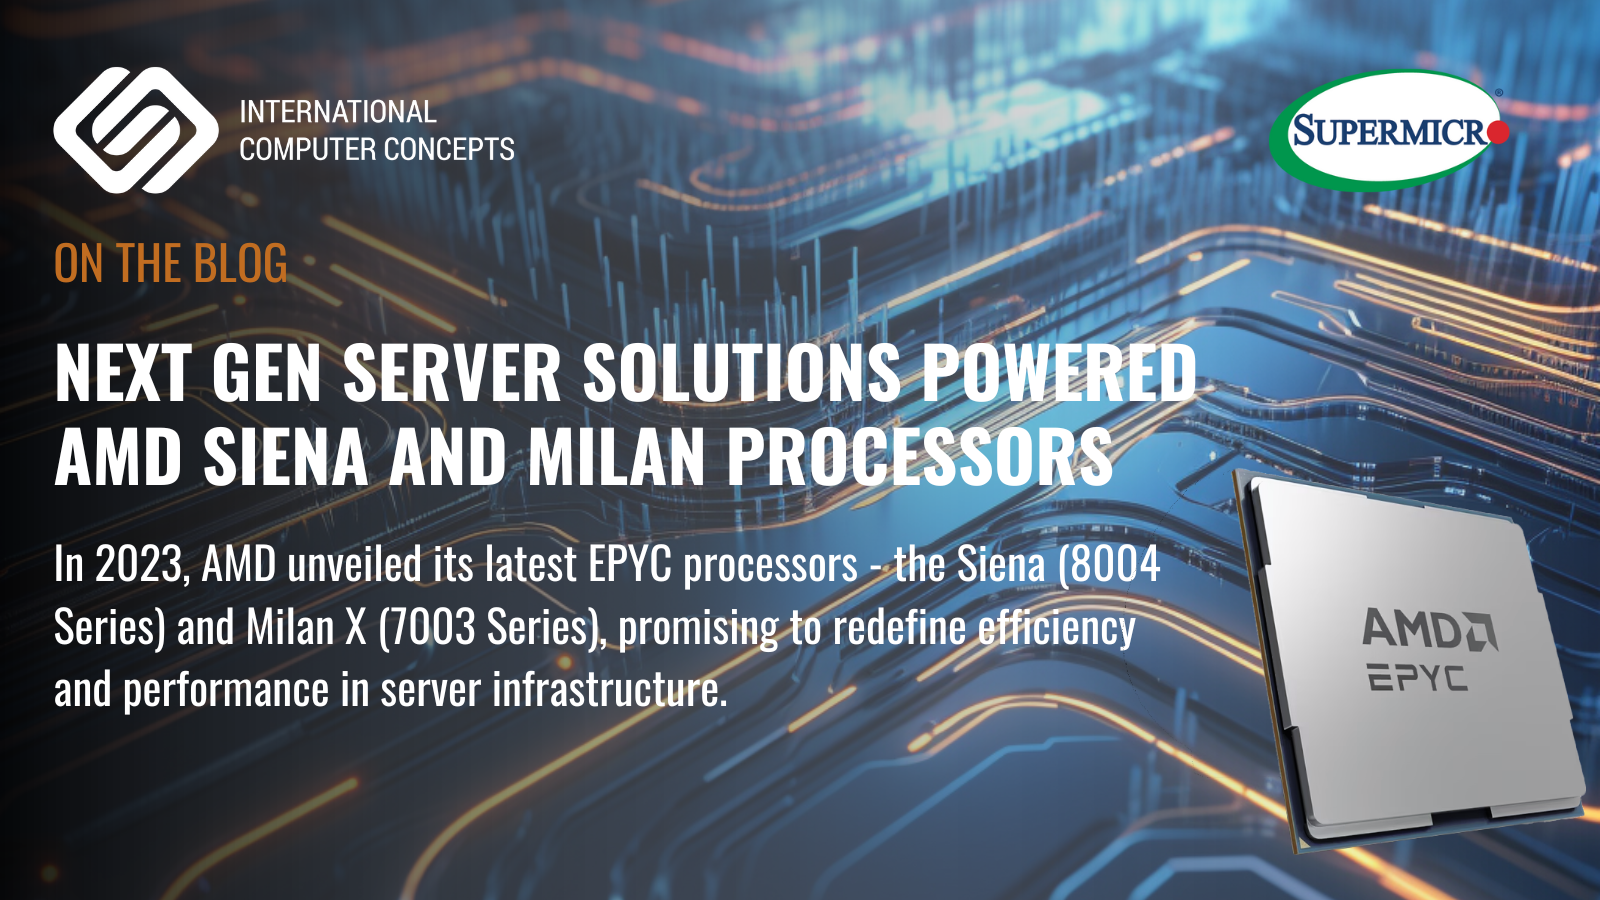 Next-Gen Server Solutions powered AMD Siena and Milan Processors, in Collaboration with SuperMicro and ICC